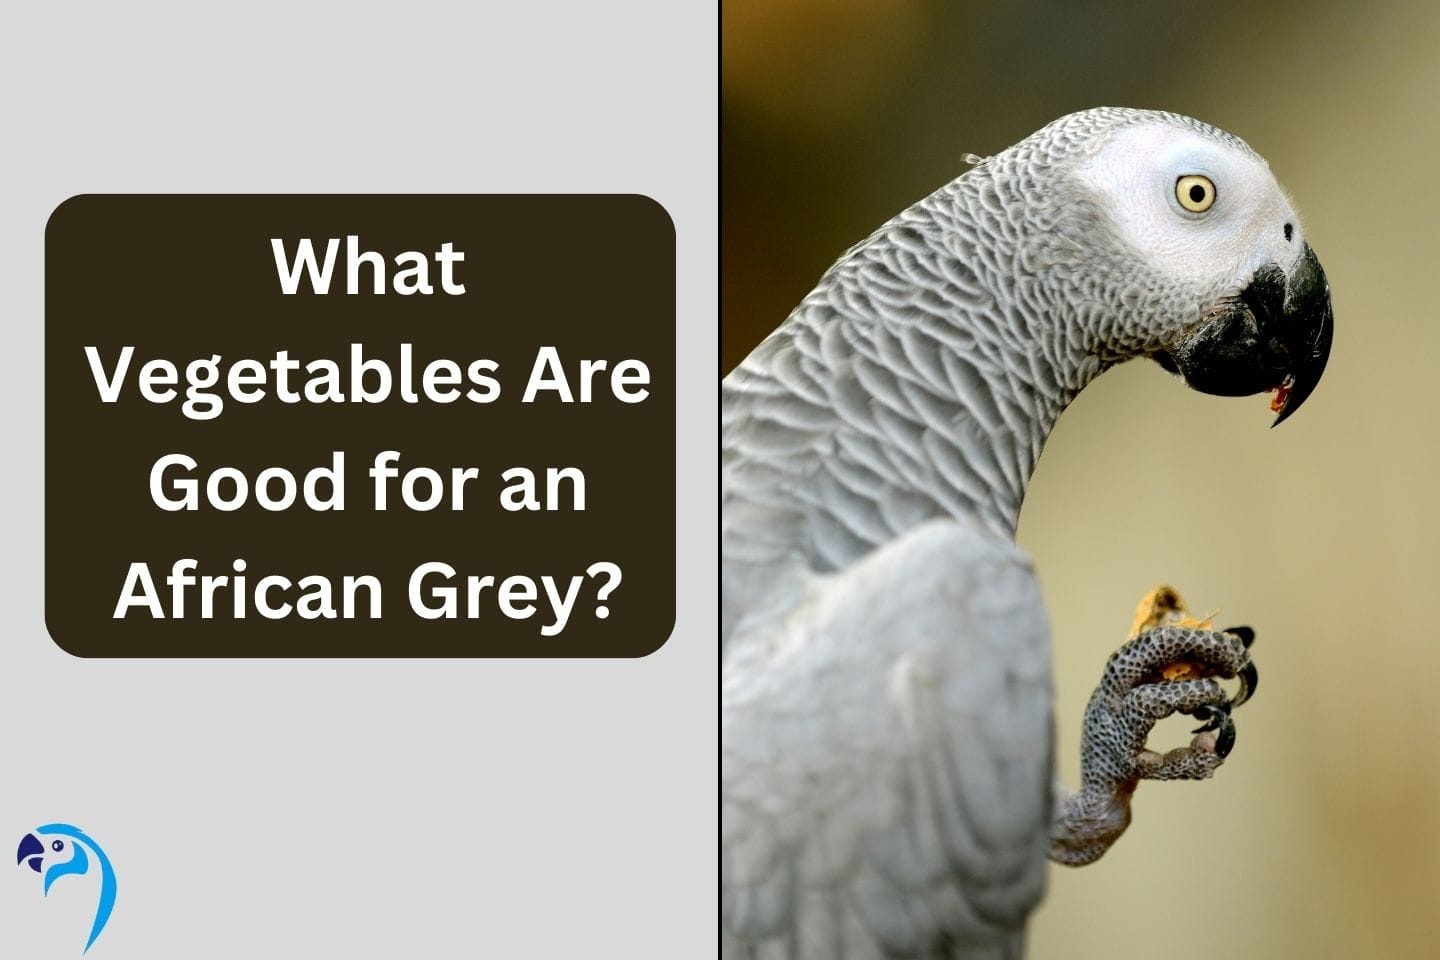 What Vegetables Are Good for an African Grey